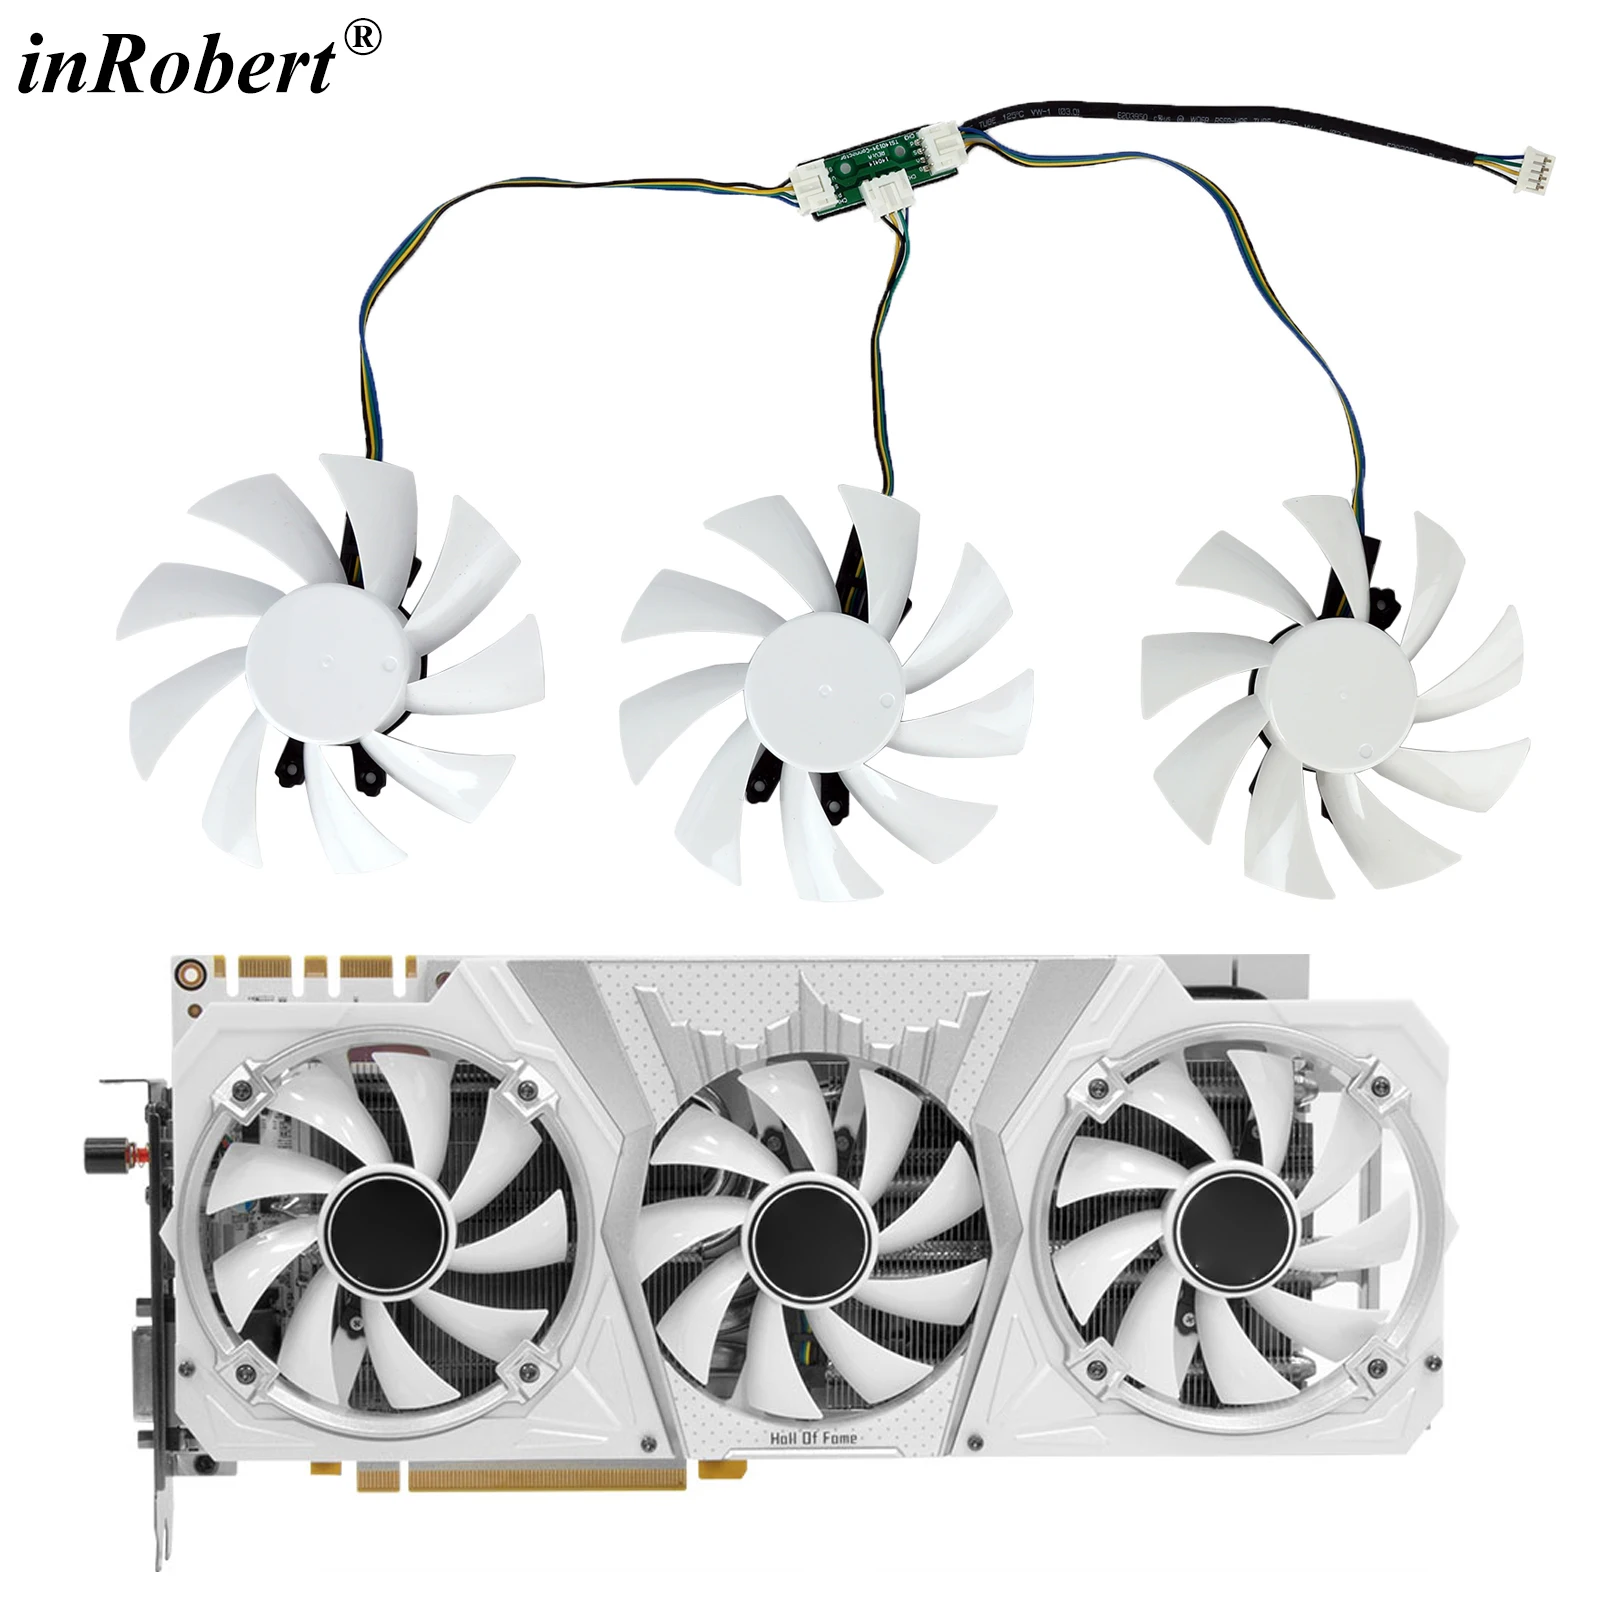 

GA92S2H Hall of Fame Graphics Card Fan Replacement For Galax GTX 1060 1070 1080 Ti HOF GPU Cooler